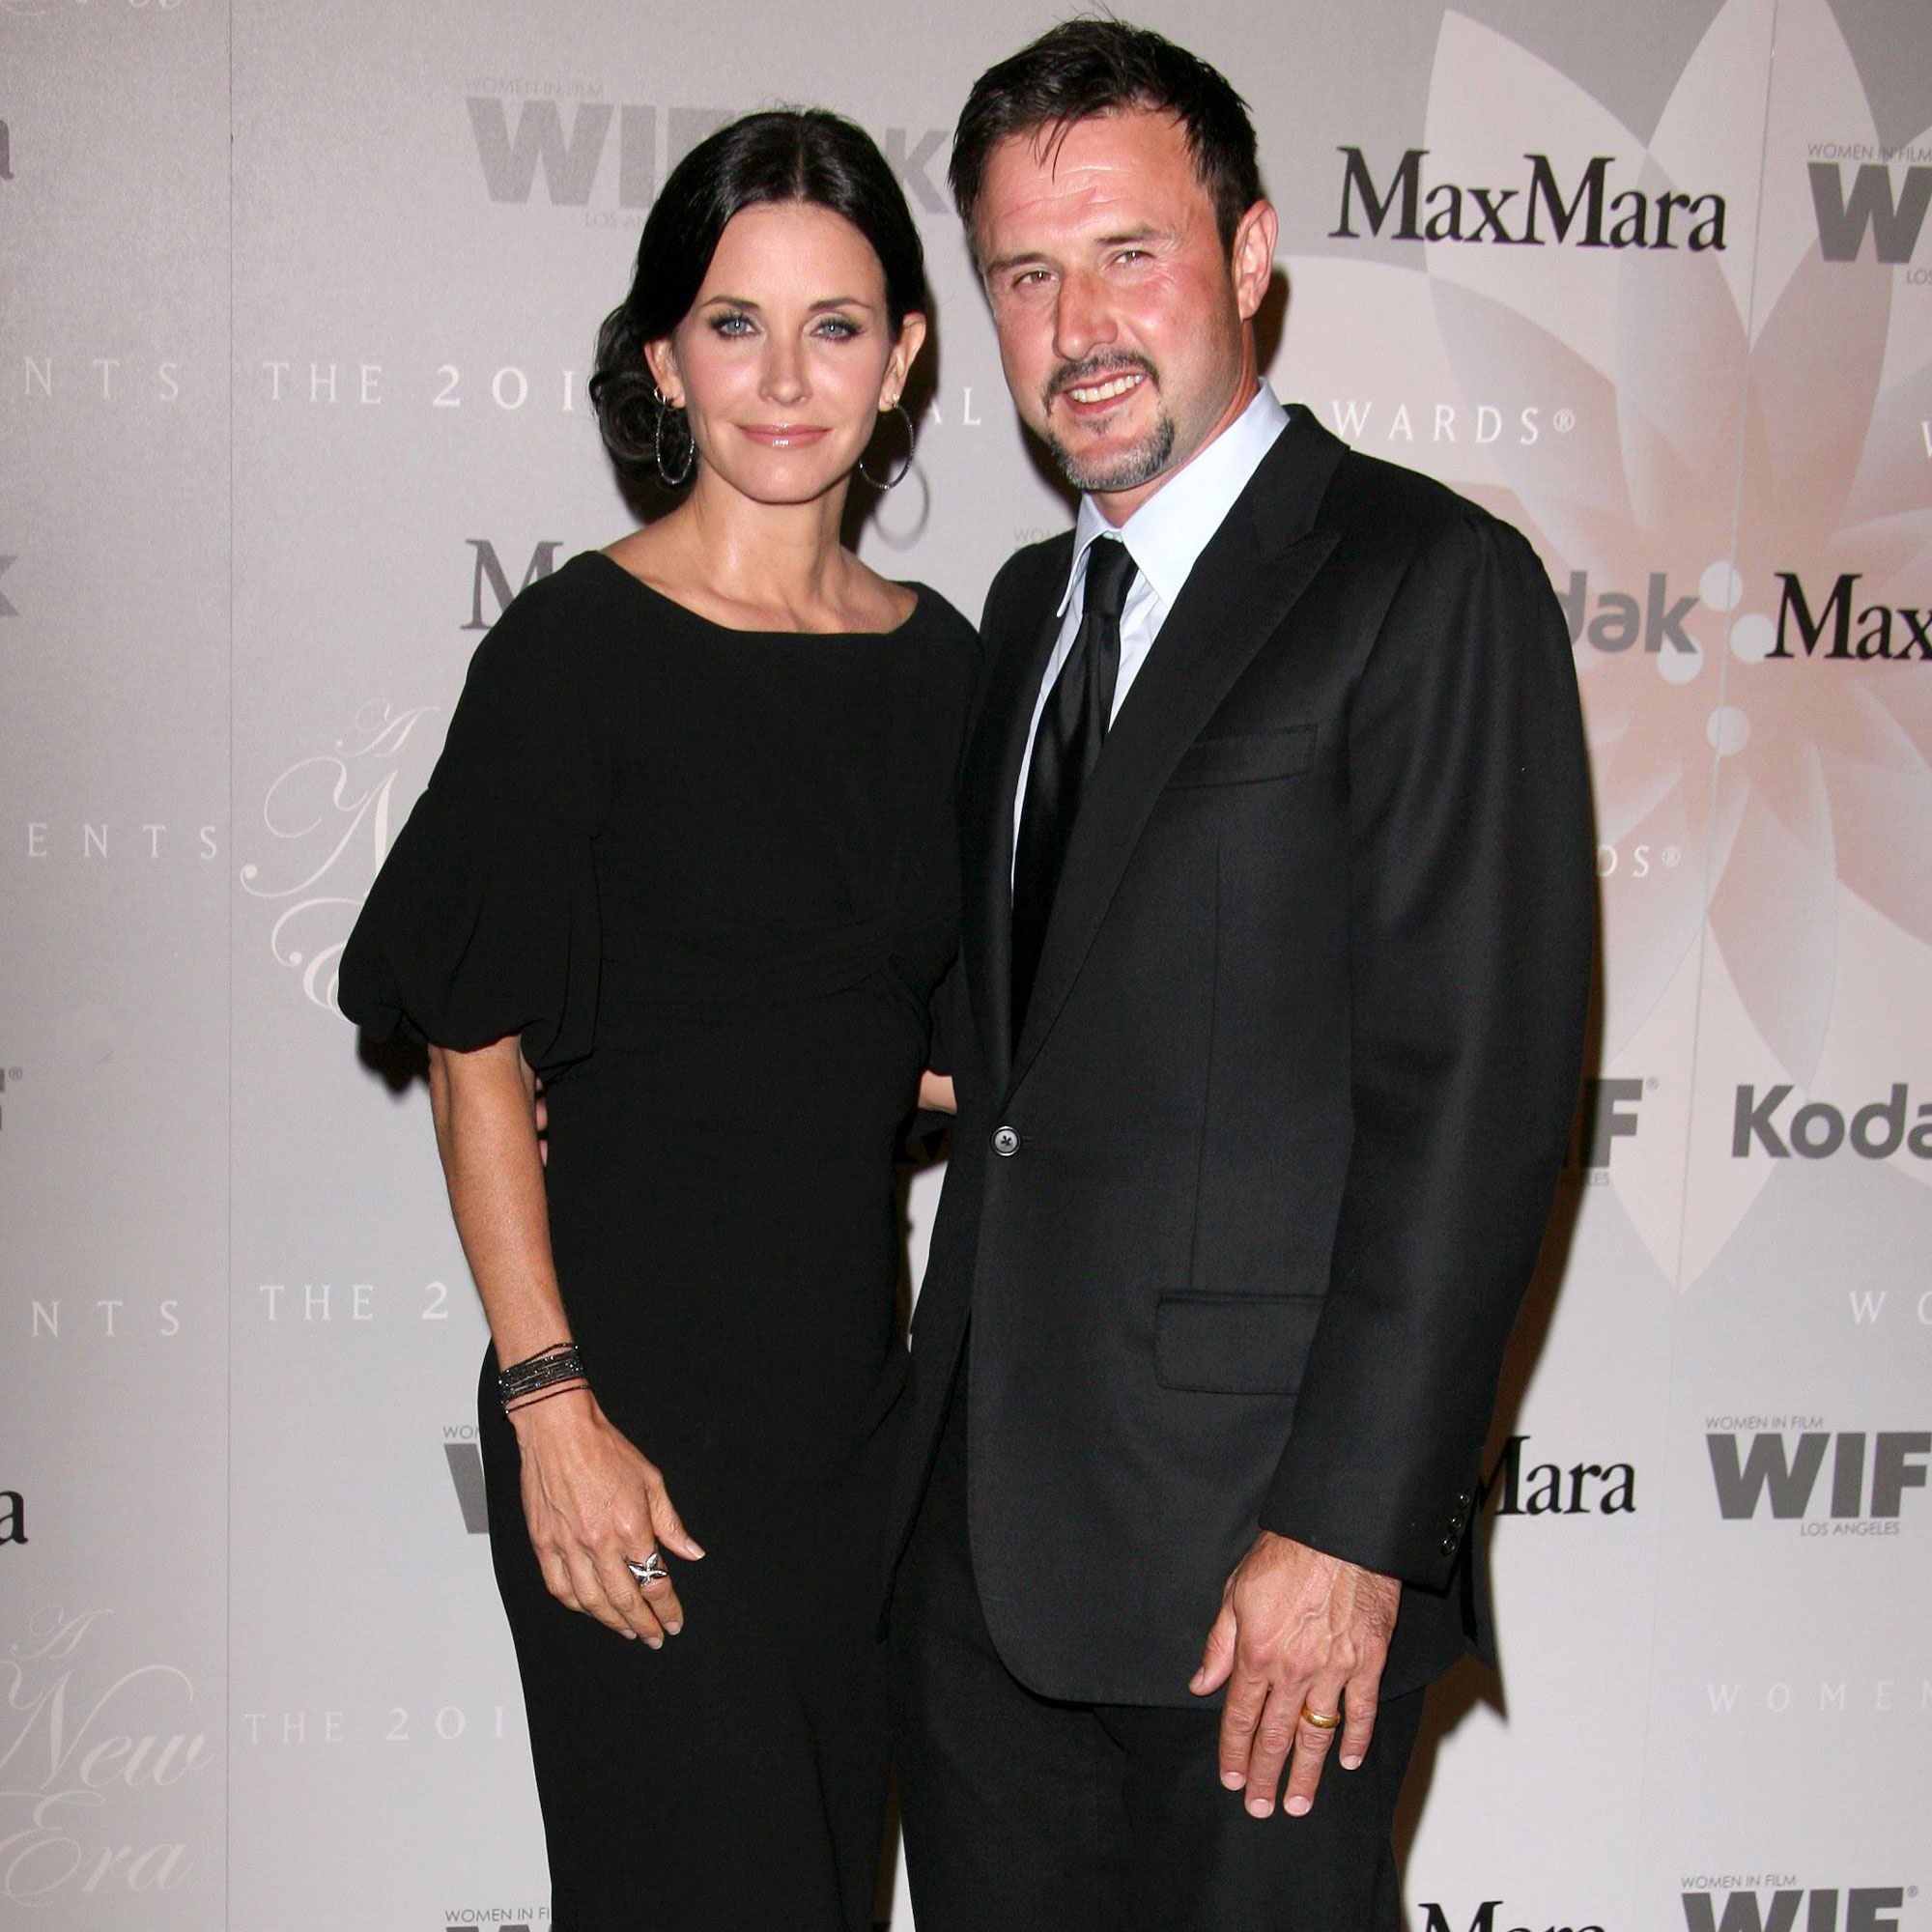 David Arquette: Met his future wife, Courteney Cox, during the filming of Scream in 1996. 2000x2000 HD Wallpaper.